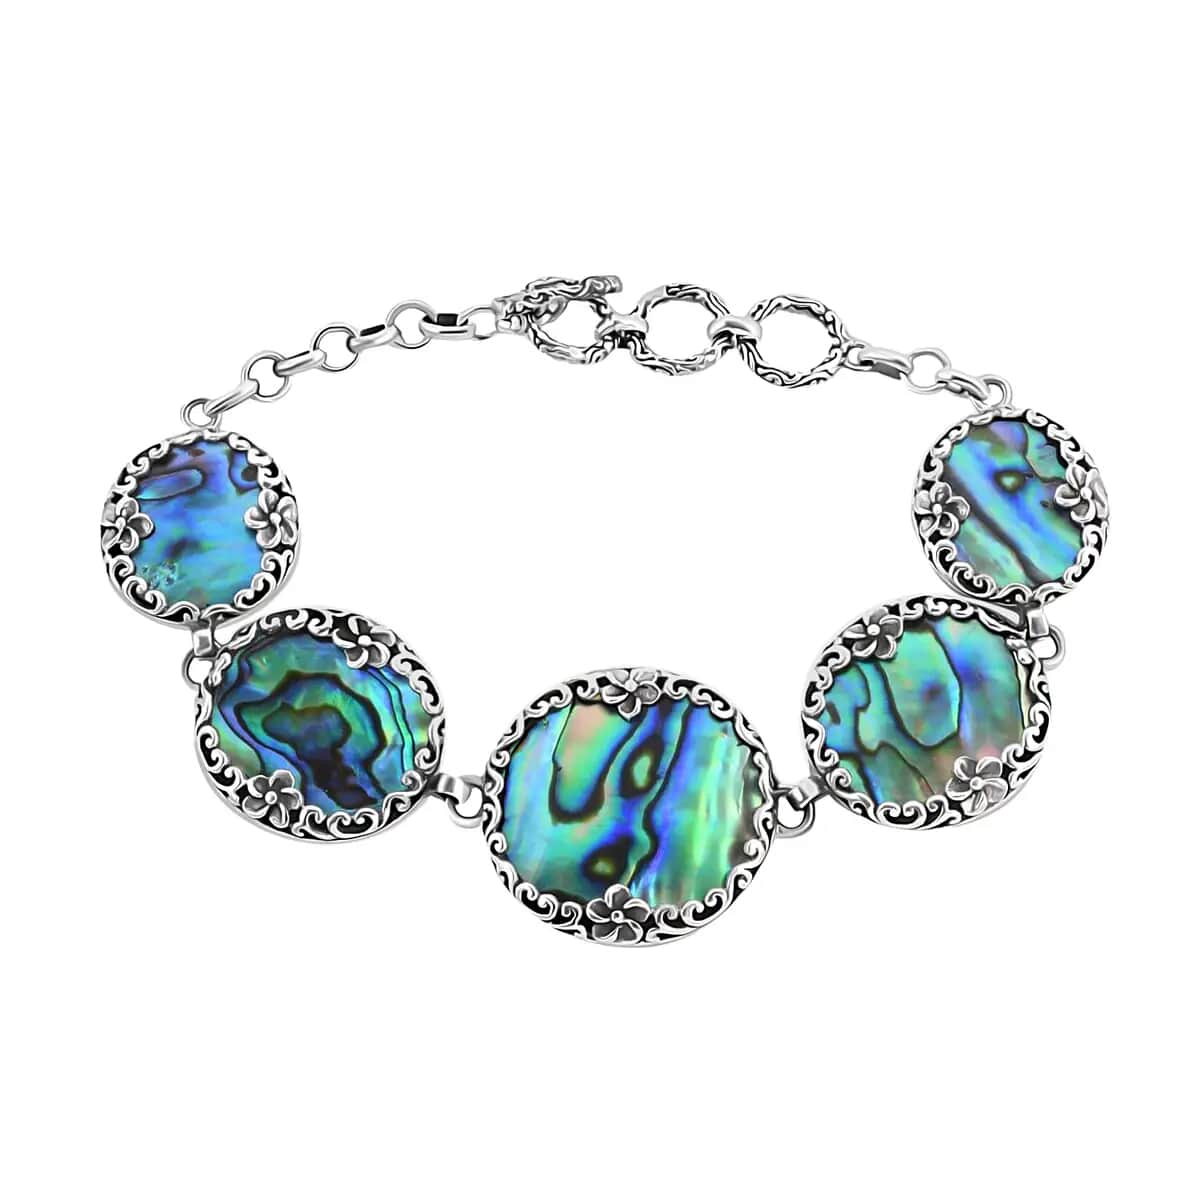 Bali Legacy Abalone Shell Bracelet in Sterling Silver, Sterling Silver Bracelet, 5 Stone Bracelet, Toggle Clasp Bracelet, Silver Jewelry, Birthday Gift (6.50-8.0In) image number 0